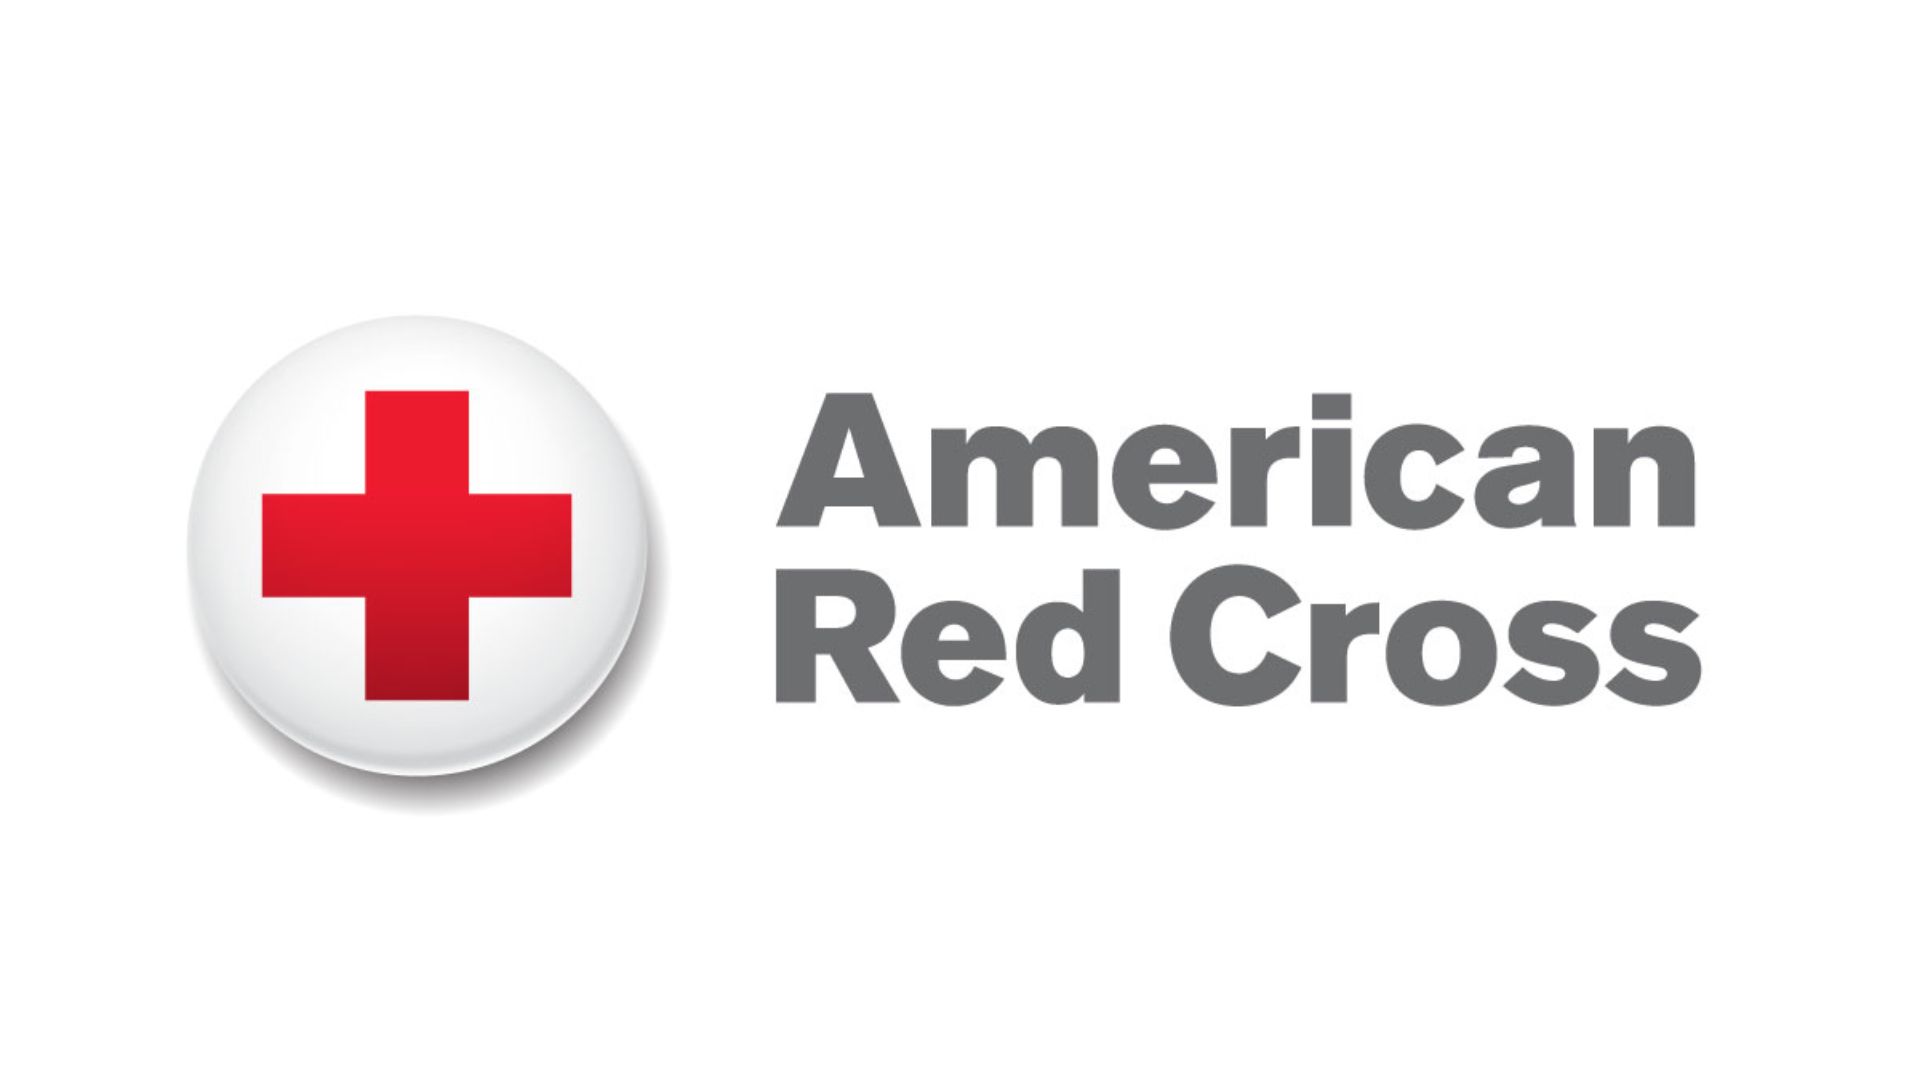 The Red Cross.